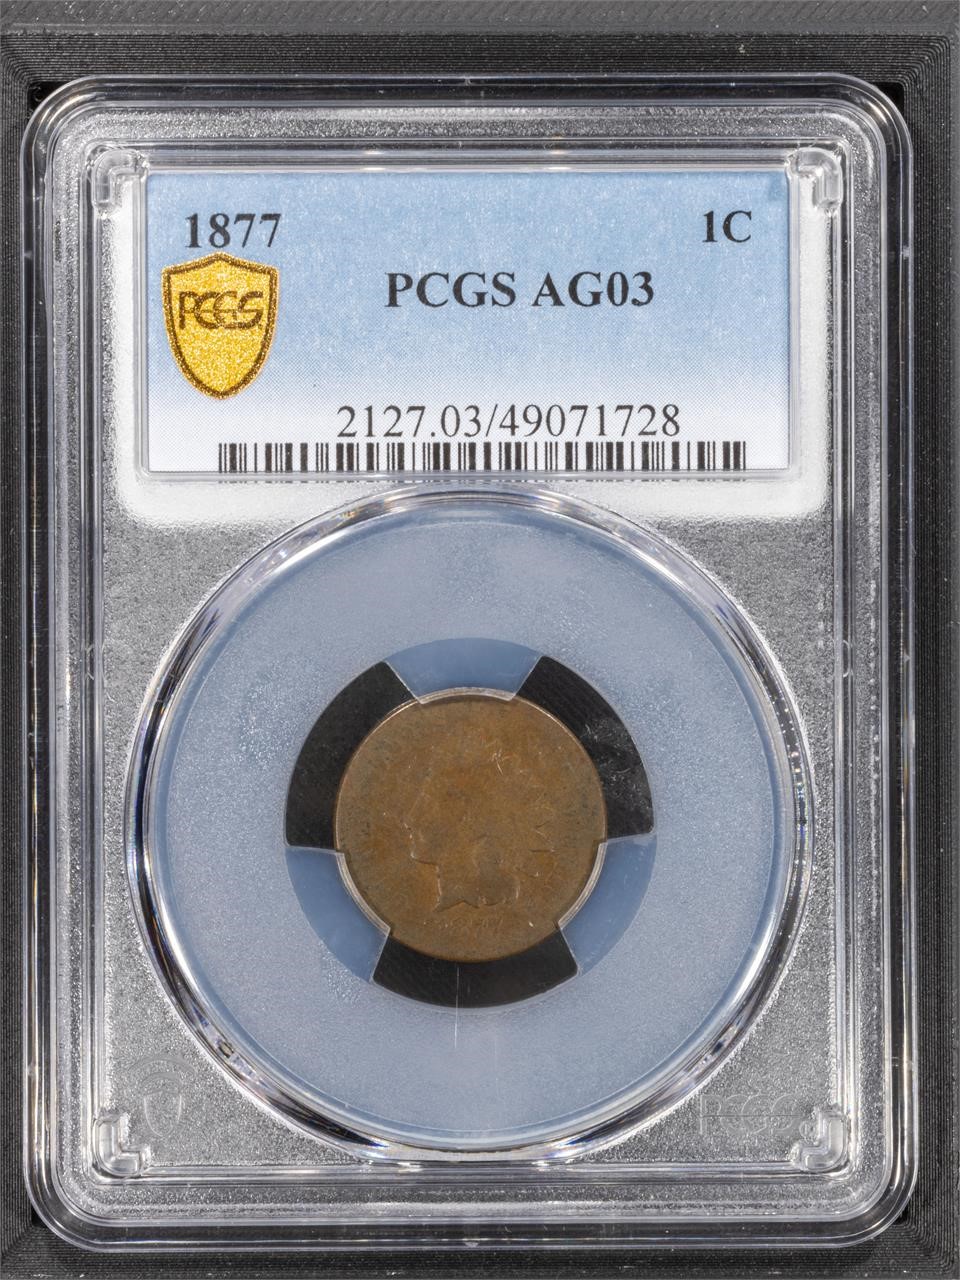 Historic Coppers to Silver Dollars Auction